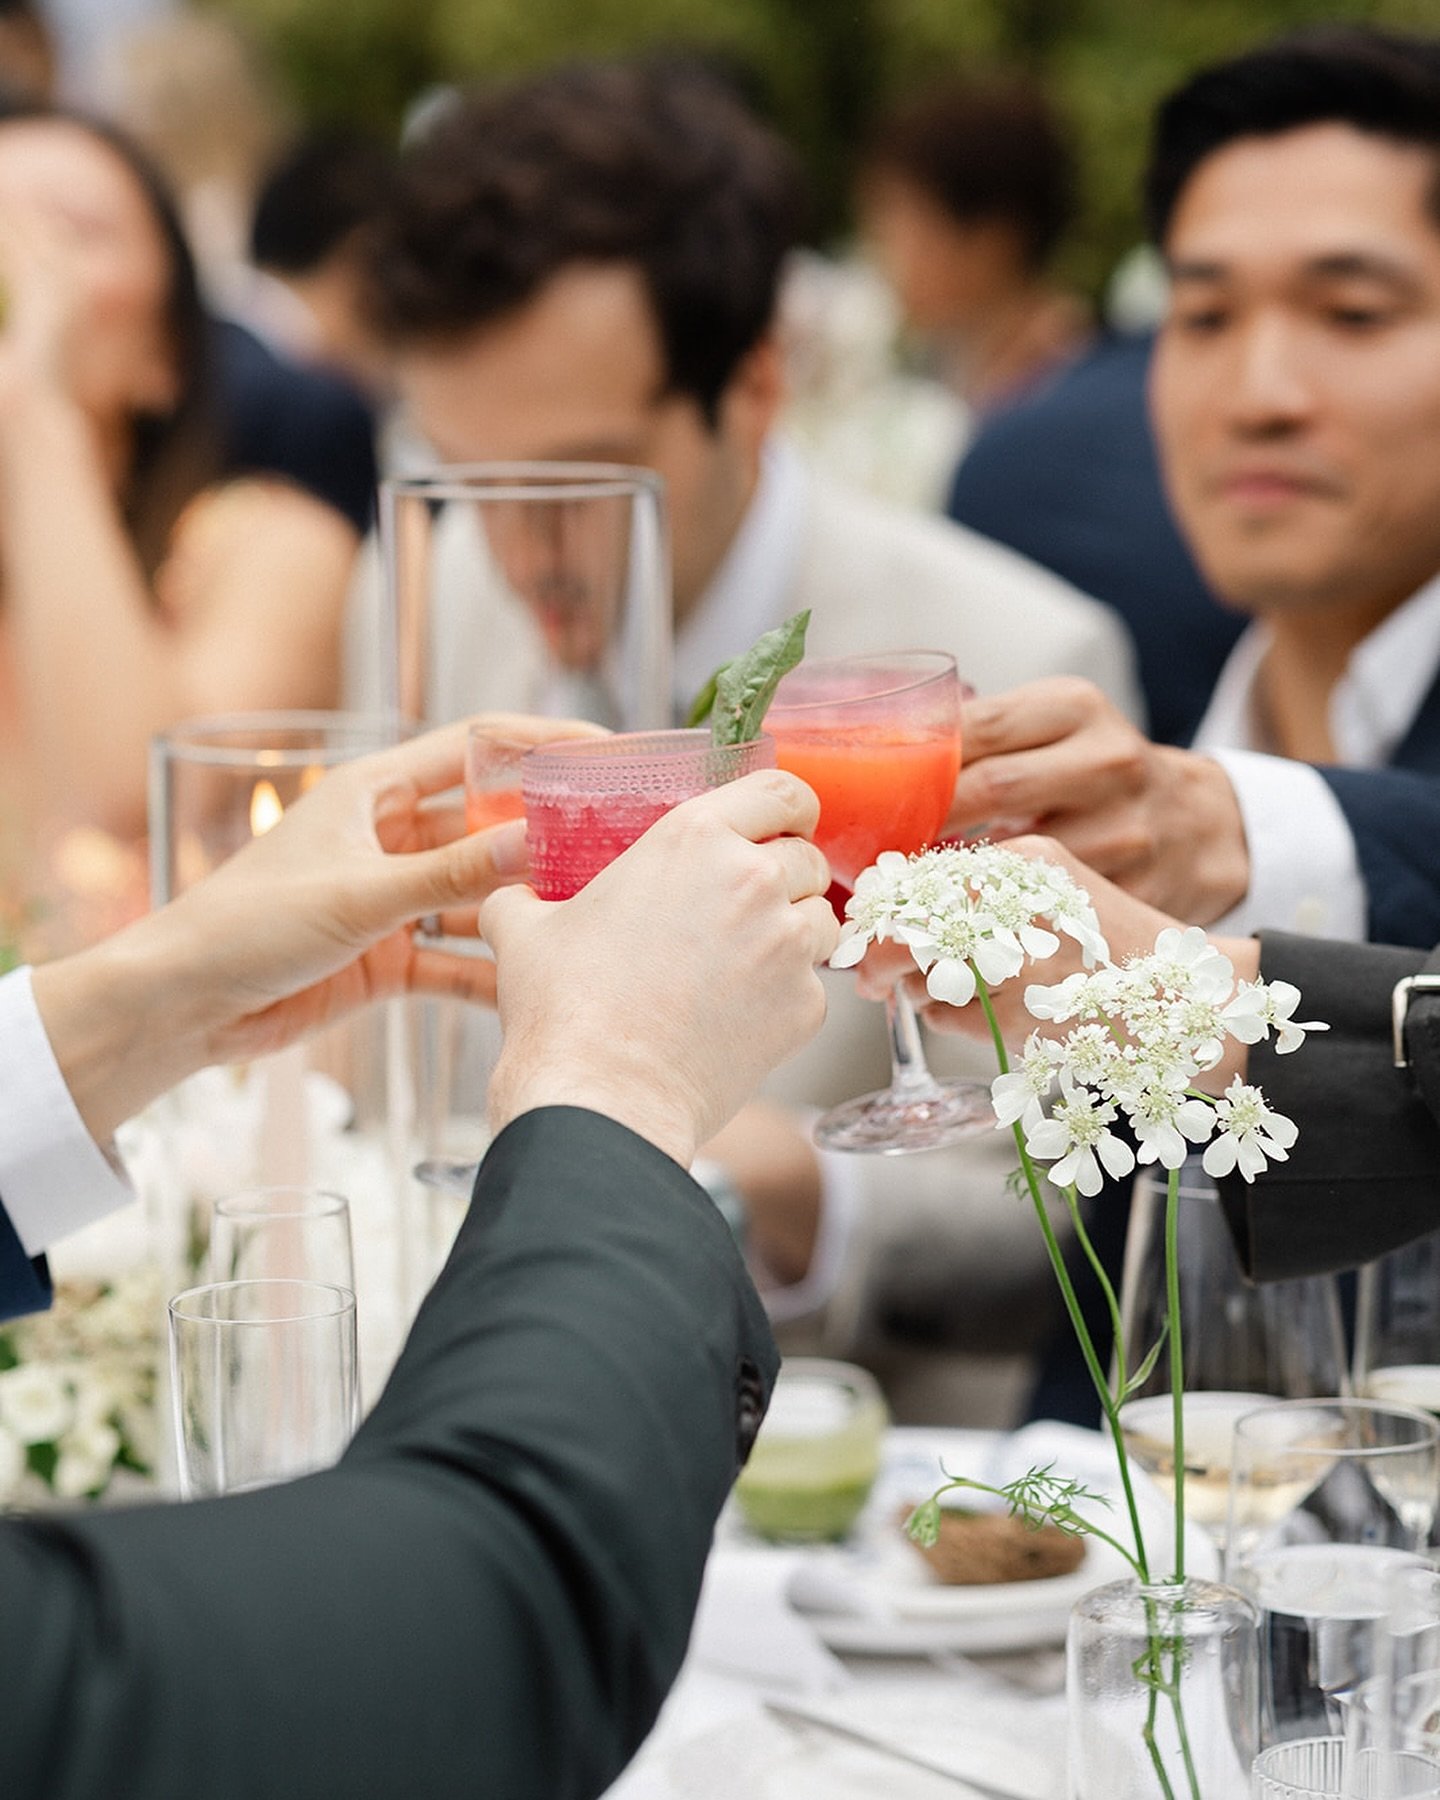 Celebrate your PNW wedding with craft cocktails and breathtaking surroundings! @kitsapbartendingservices brings the best of the Pacific Northwest to your special day.

Comment below and share which cocktail you&rsquo;ll be toasting with this summer! 